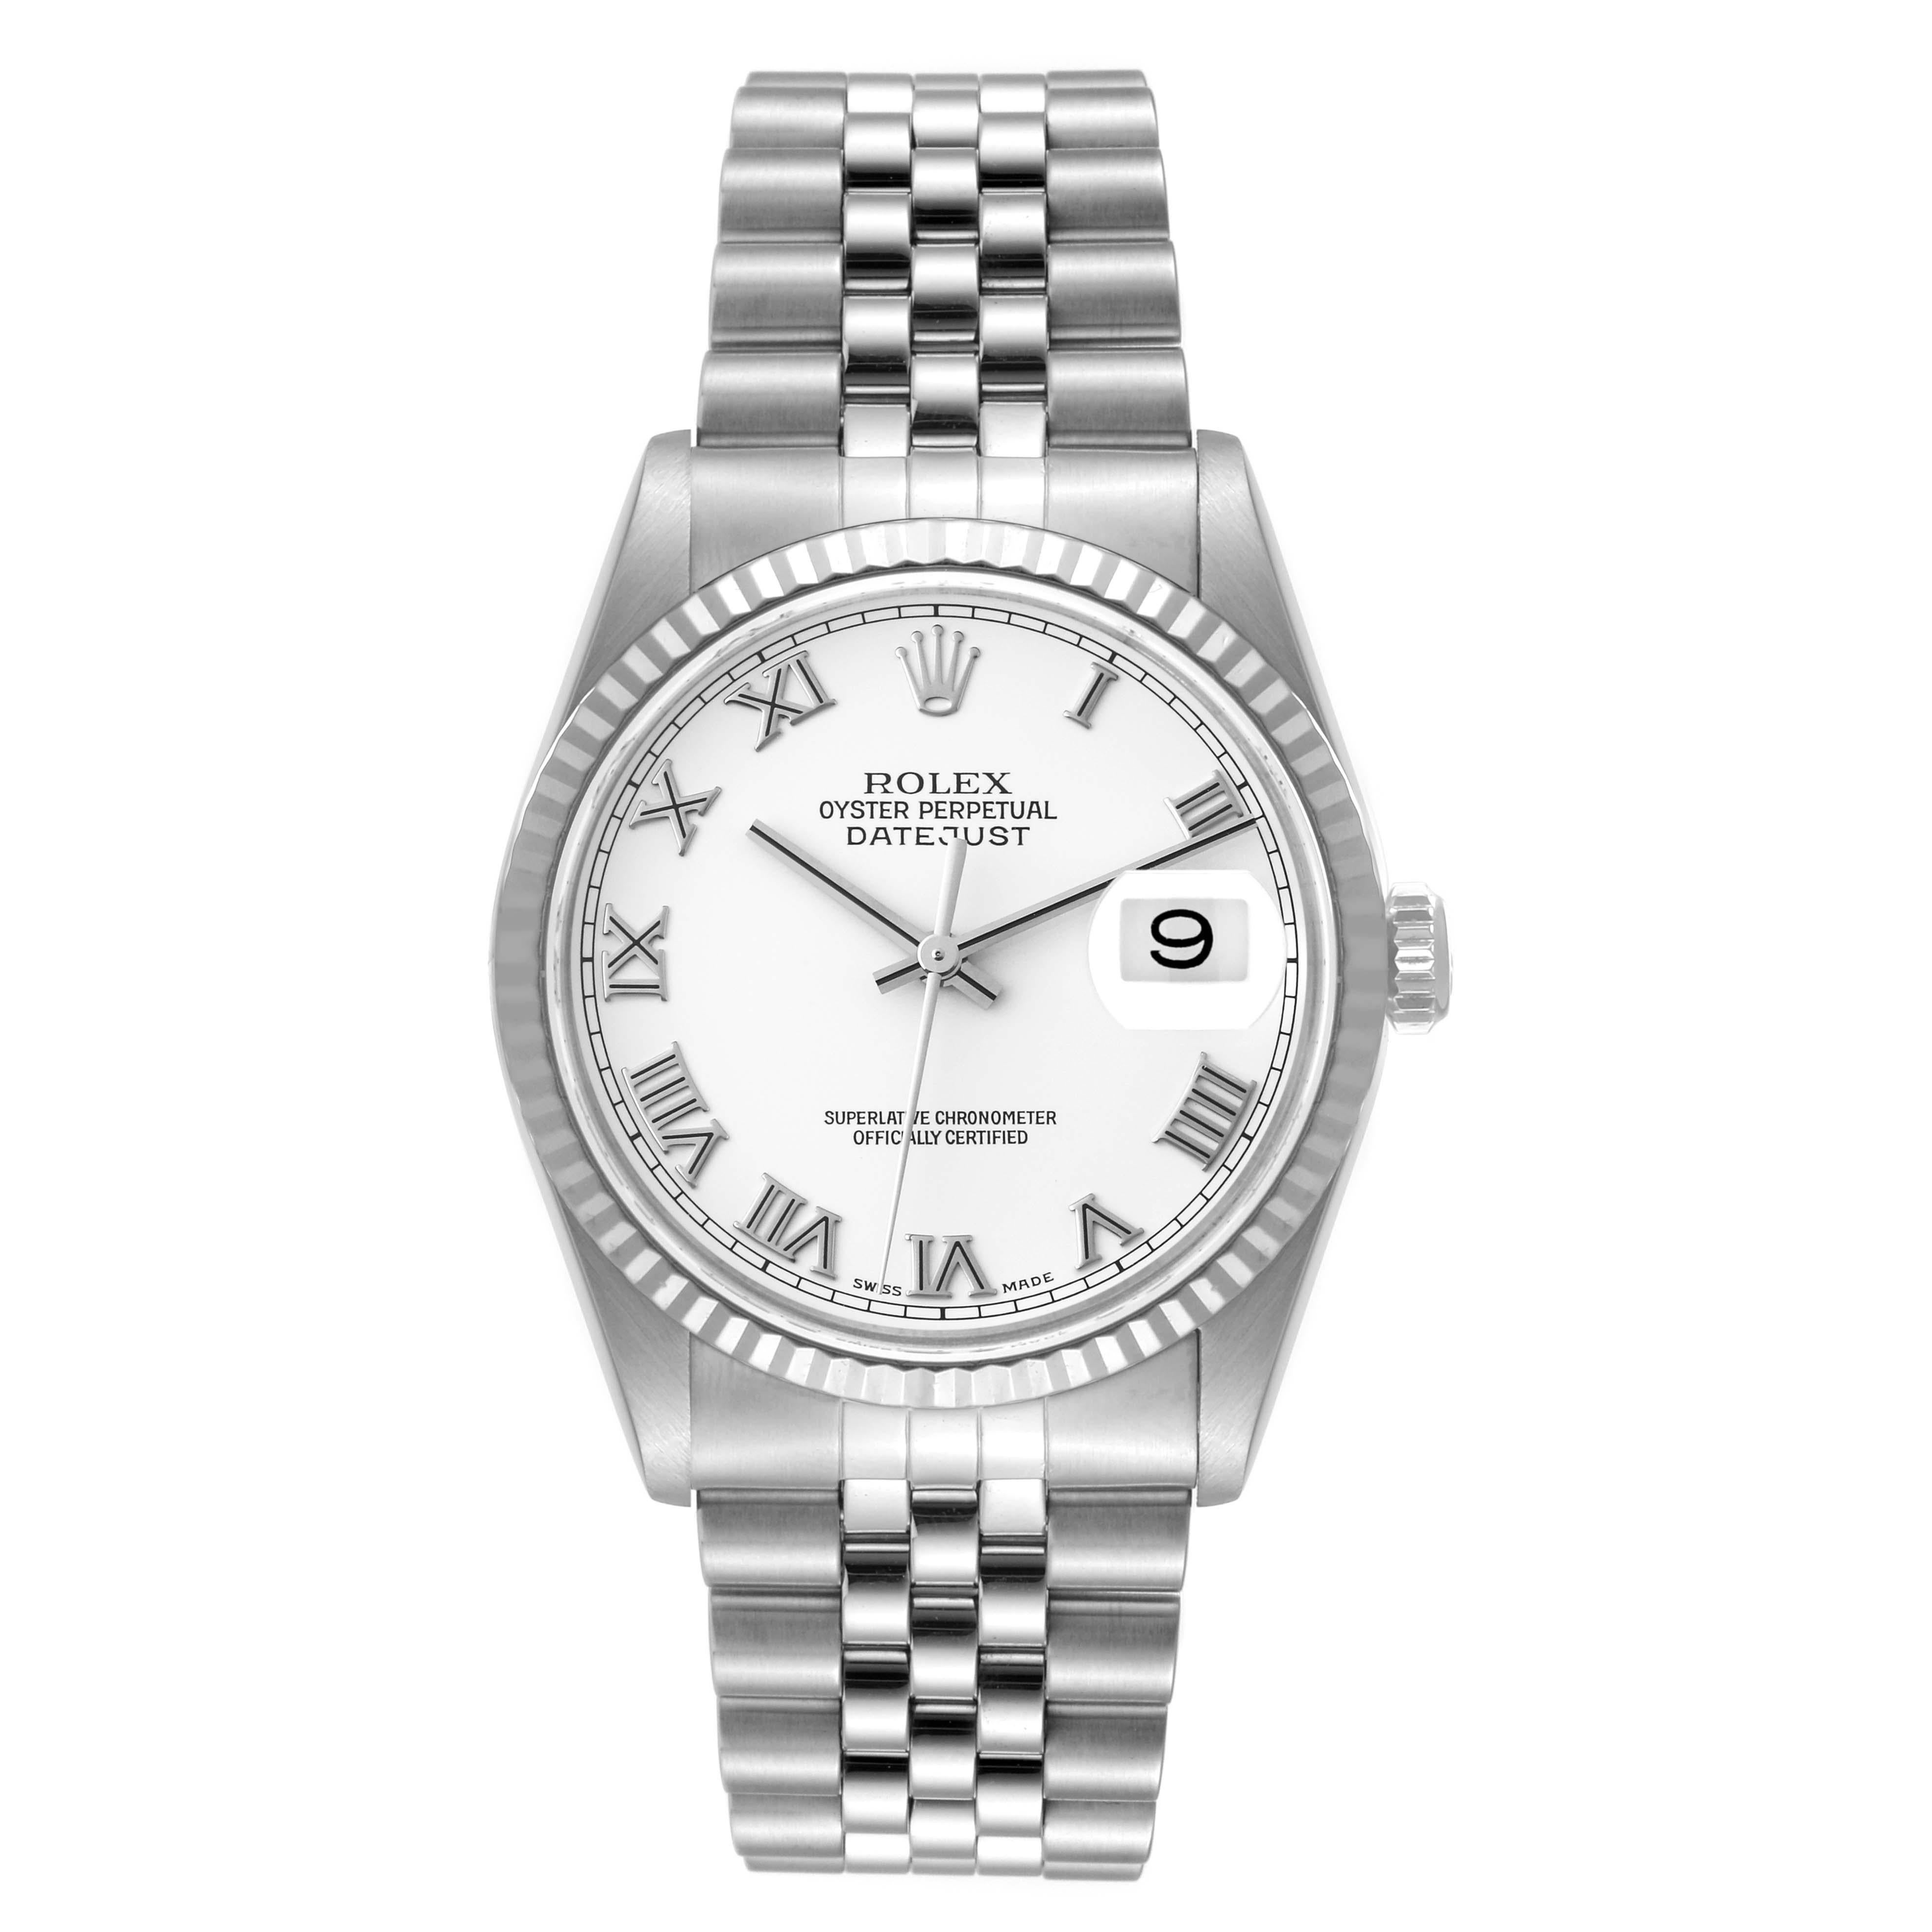 Rolex Datejust Steel White Gold Roman Dial Mens Watch 16234 Box Papers. Officially certified chronometer automatic self-winding movement. Stainless steel oyster case 36 mm in diameter. Rolex logo on the crown. 18k white gold fluted bezel. Scratch